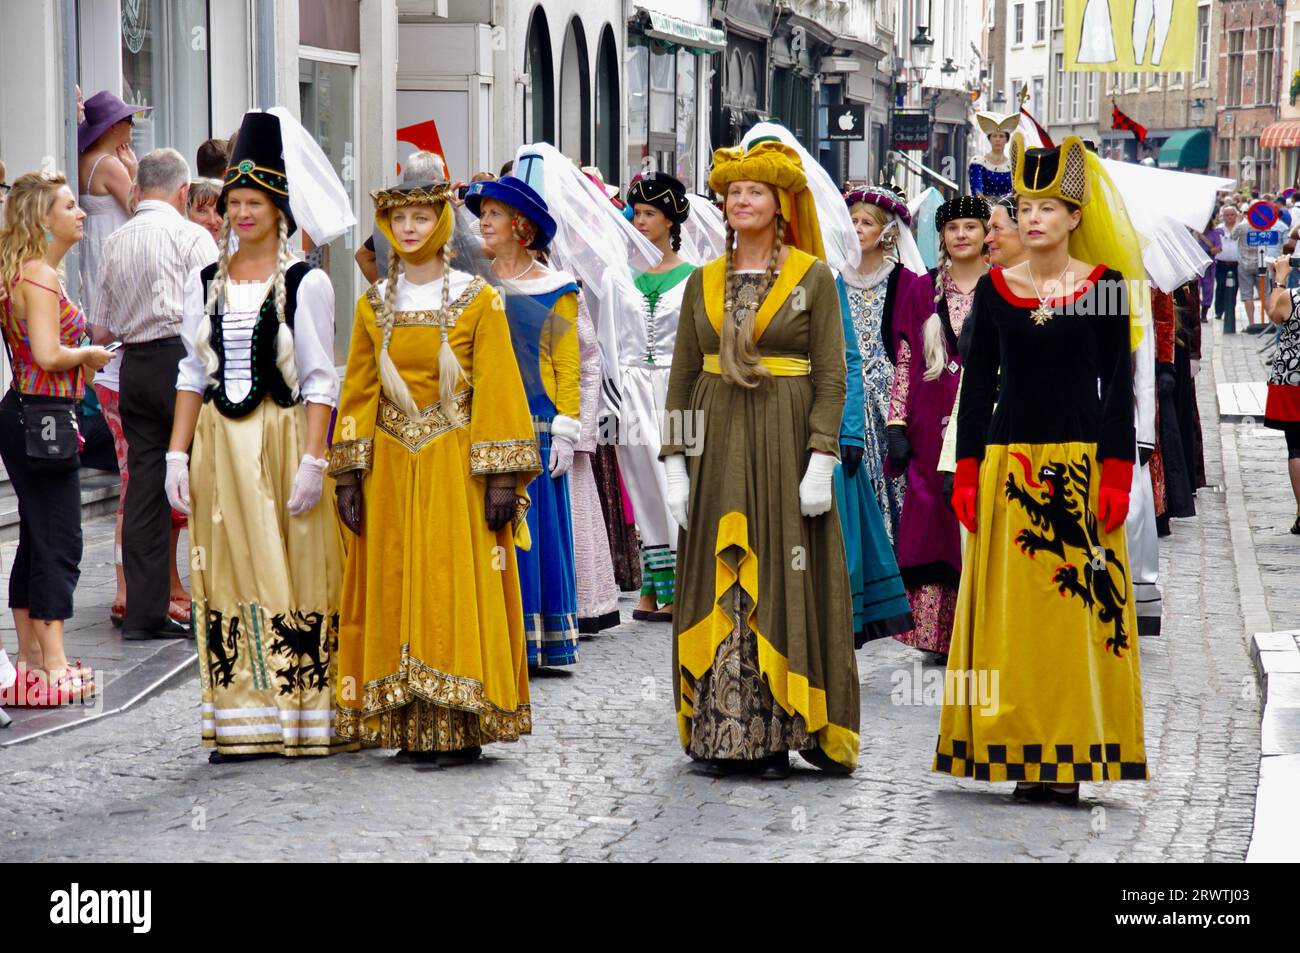 Marchers in The Procession of the Golden Tree Pageant, held every 5 years since 1958. Bruges, Belgium. Stock Photo